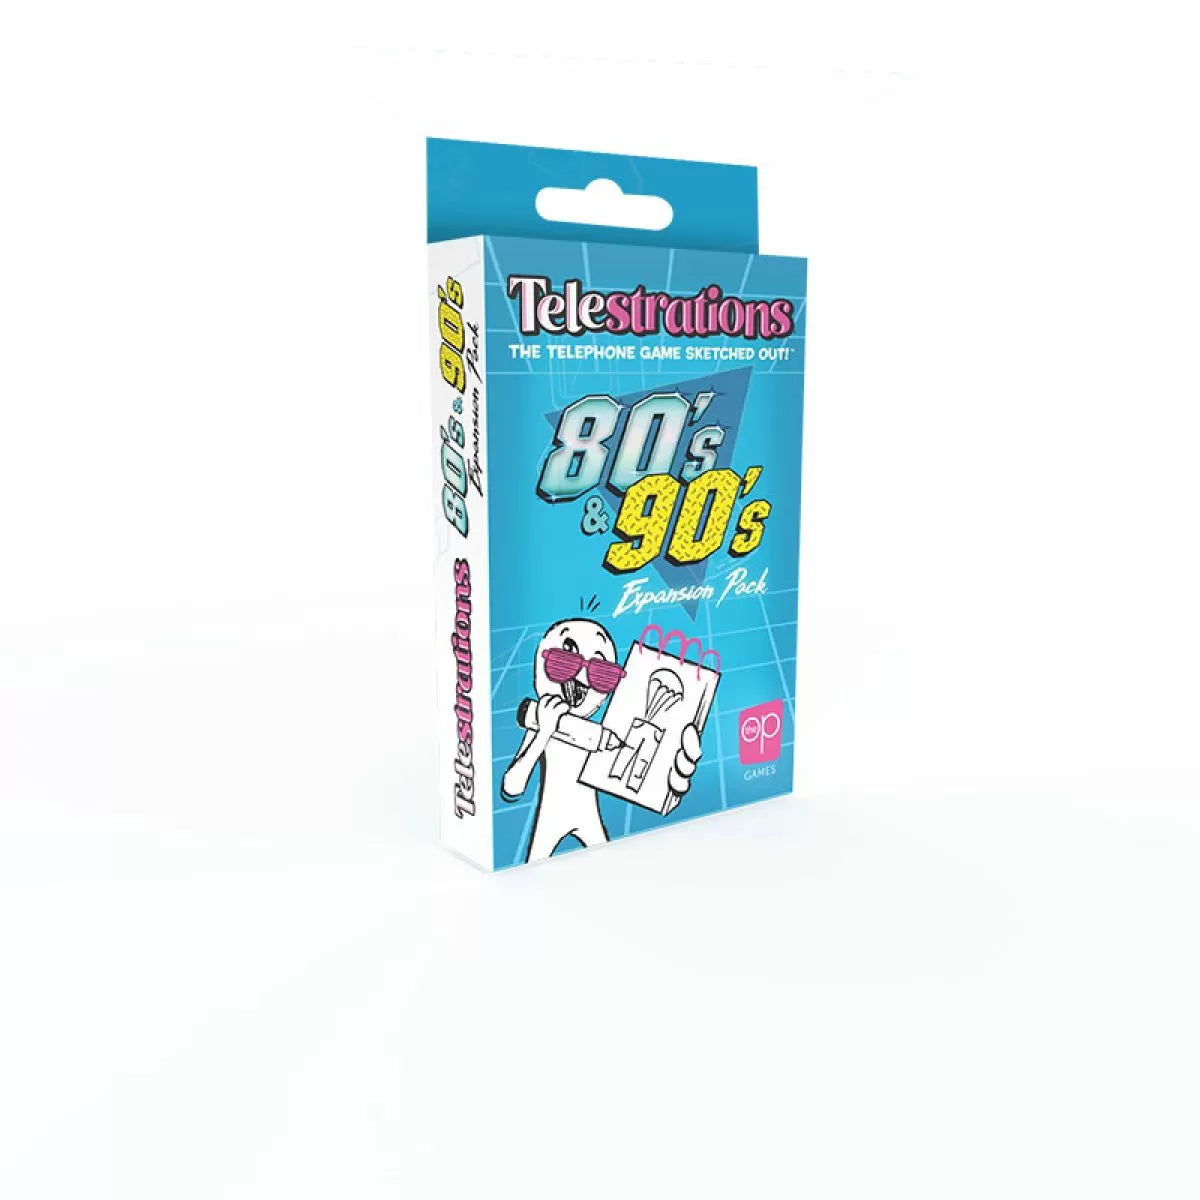 Telestrations 80s-90s Expansion Pack (Preorder)